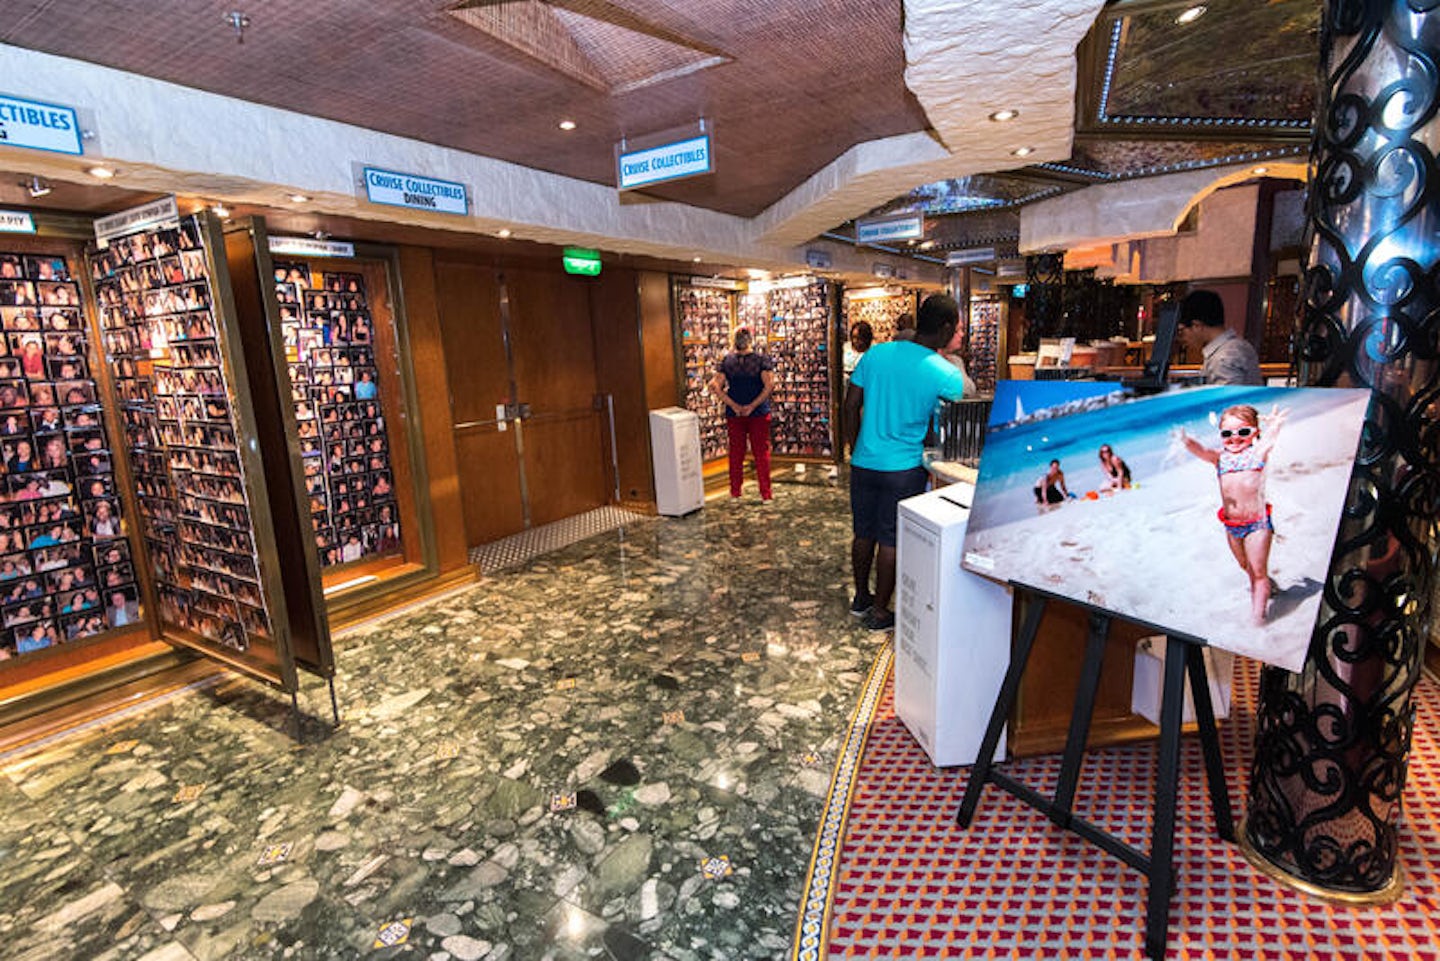 Photo Gallery on Carnival Liberty